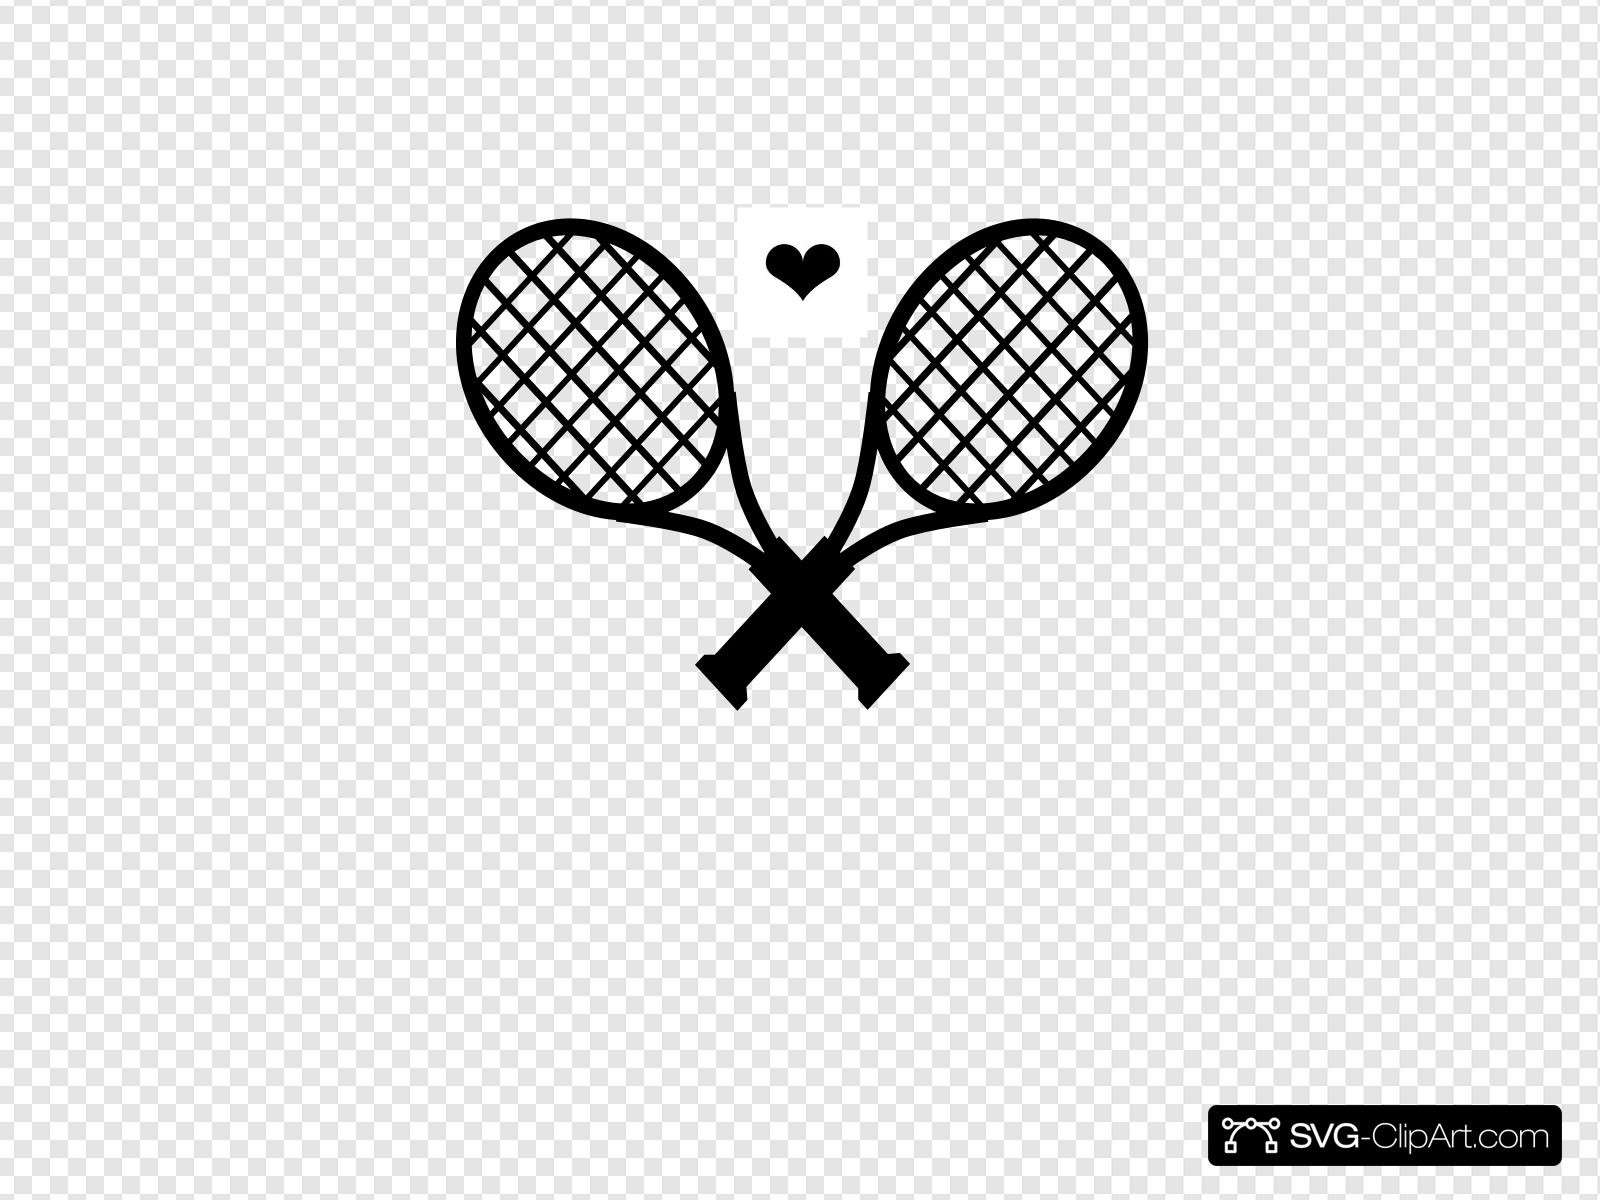 Tennis Rackets Logo Clip art, Icon and SVG.